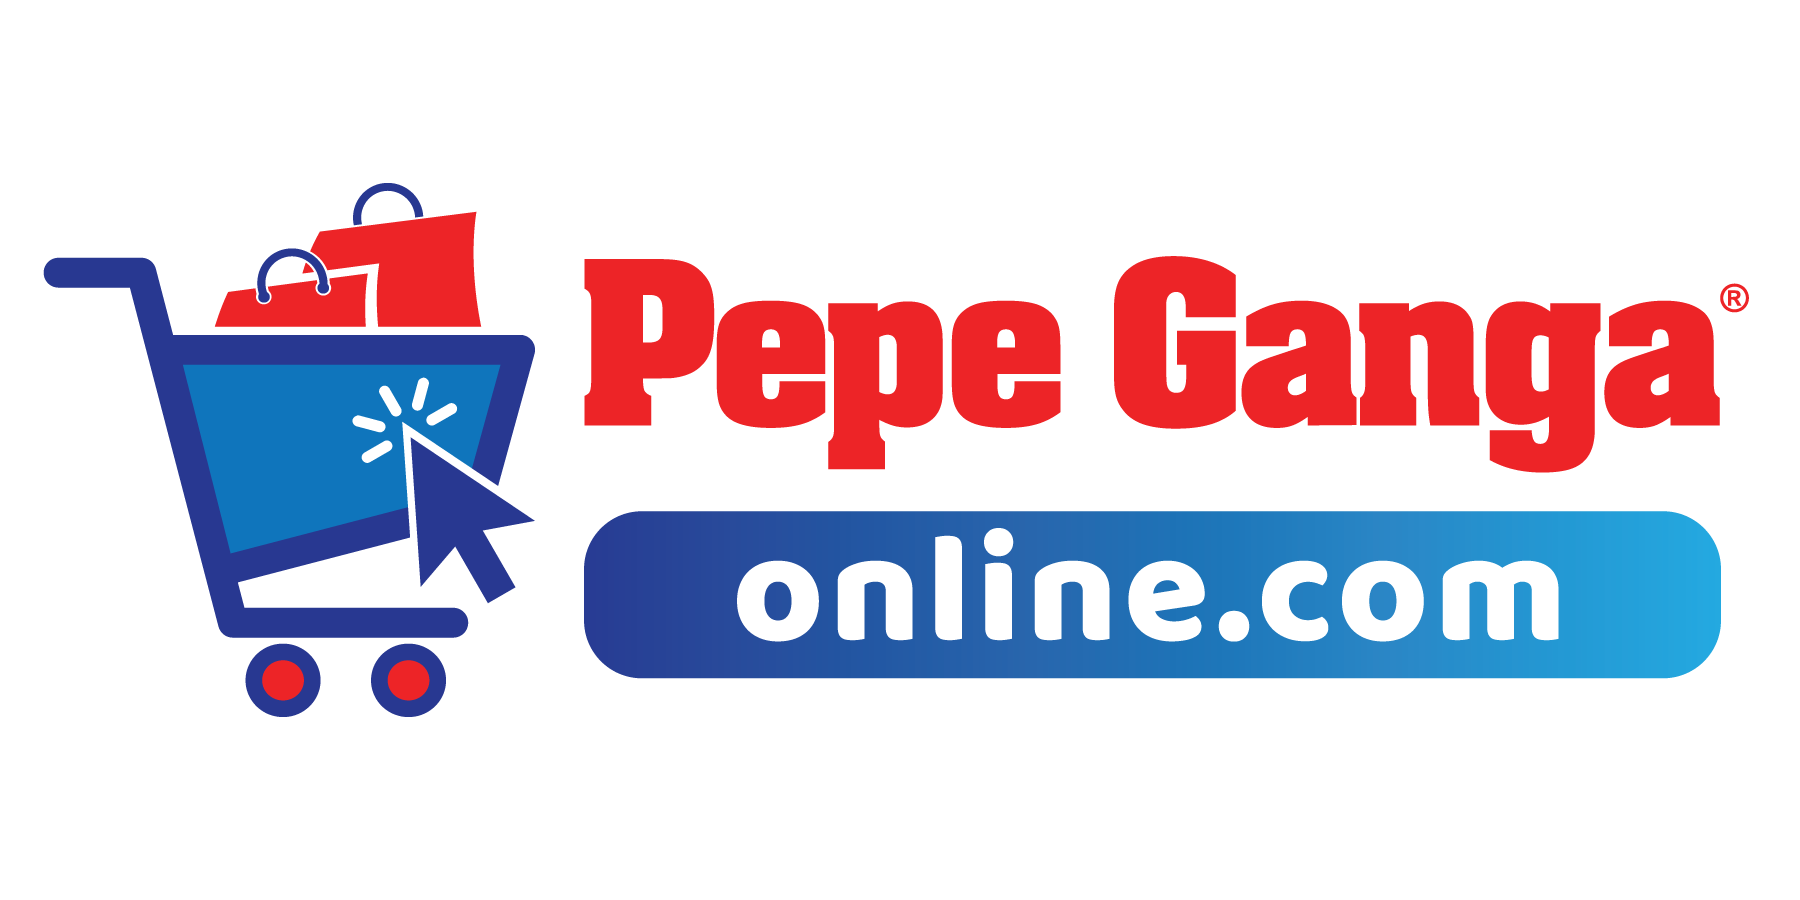 Pepe Ganga Online  Everything for the home